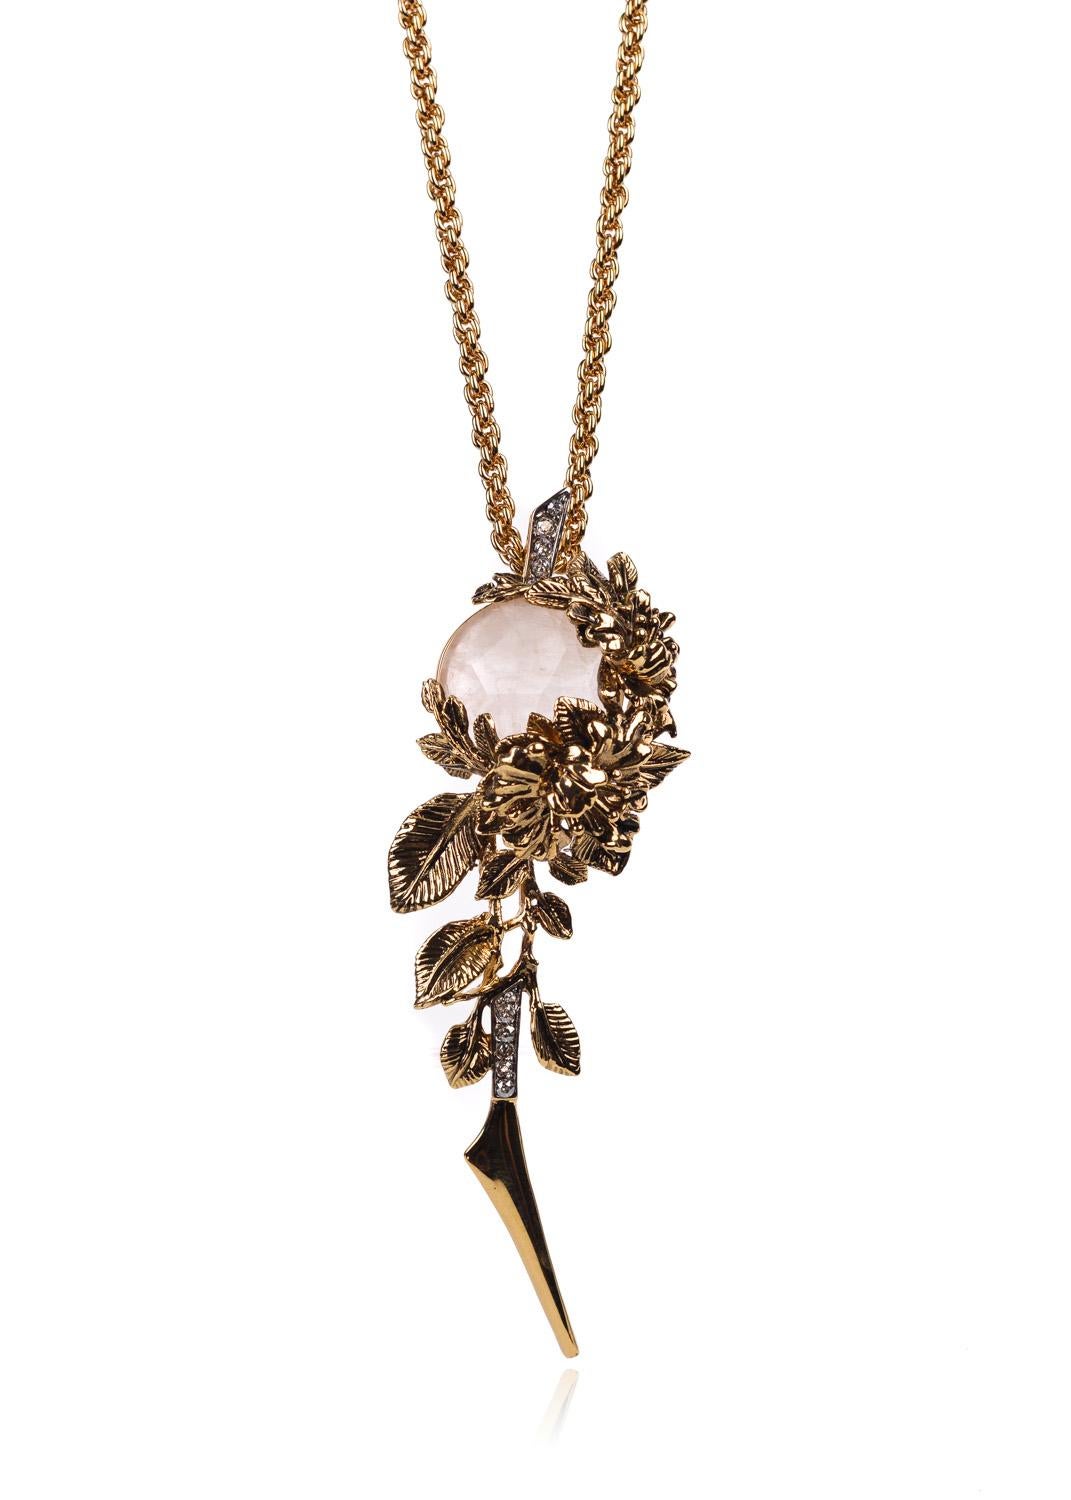 Explore your wild side with Roberto Cavalli's Swarovski Floral Pendant Necklace. This elegant piece features a chiseled white opal Swarovski Crystal, gold engraved floral encasing, and a striking Swarovski tipped leaf. You can pair this necklace